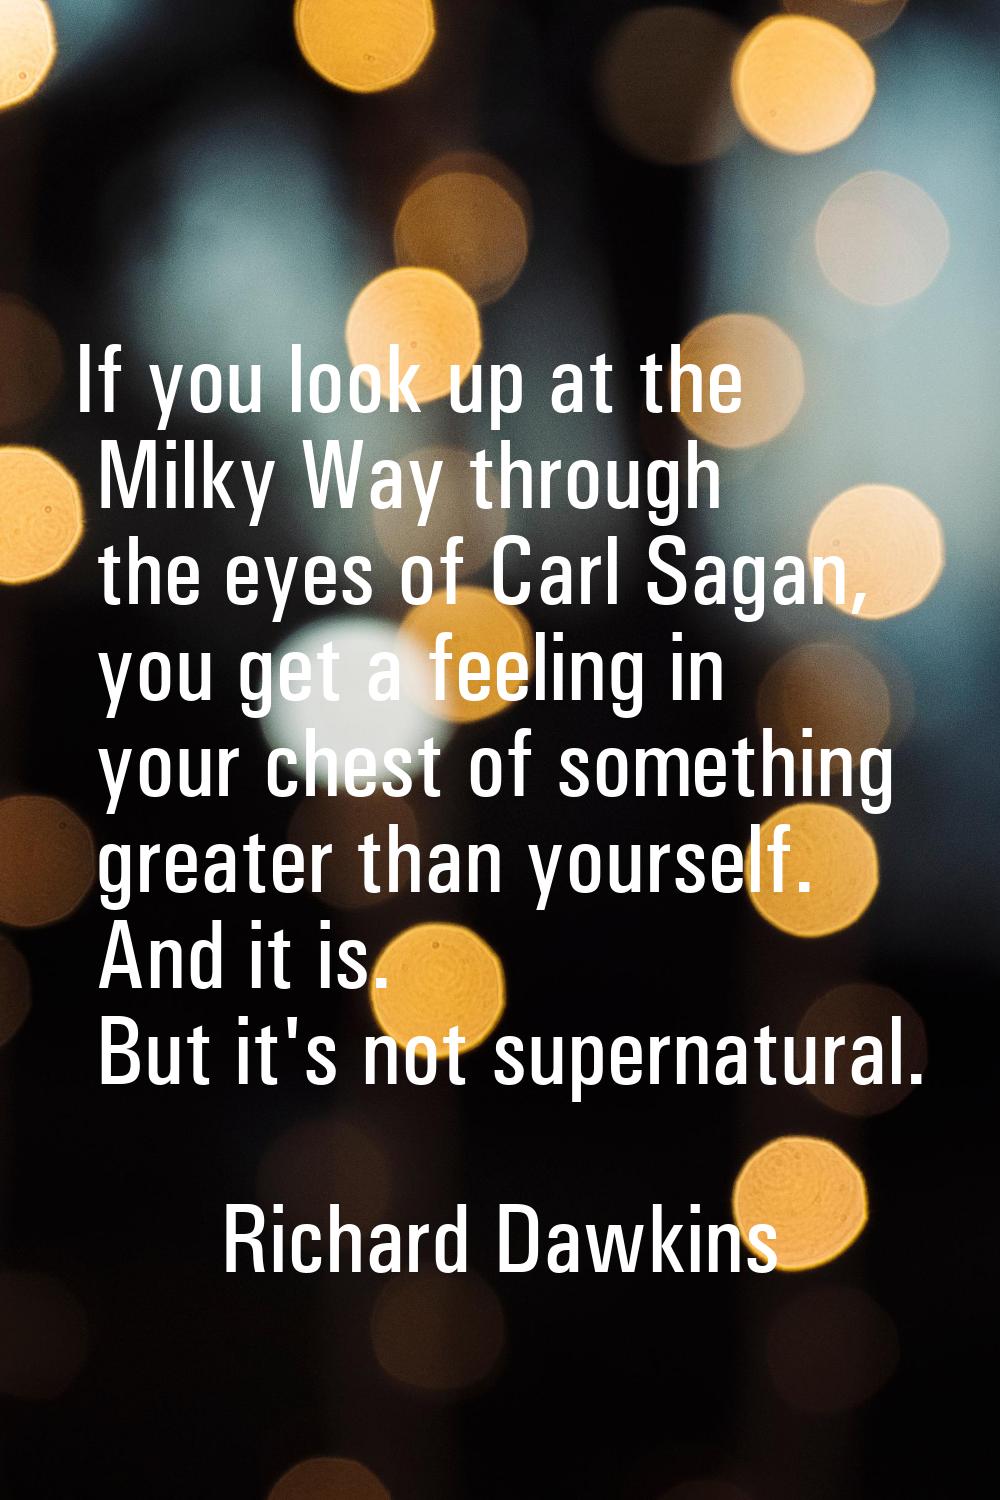 If you look up at the Milky Way through the eyes of Carl Sagan, you get a feeling in your chest of 